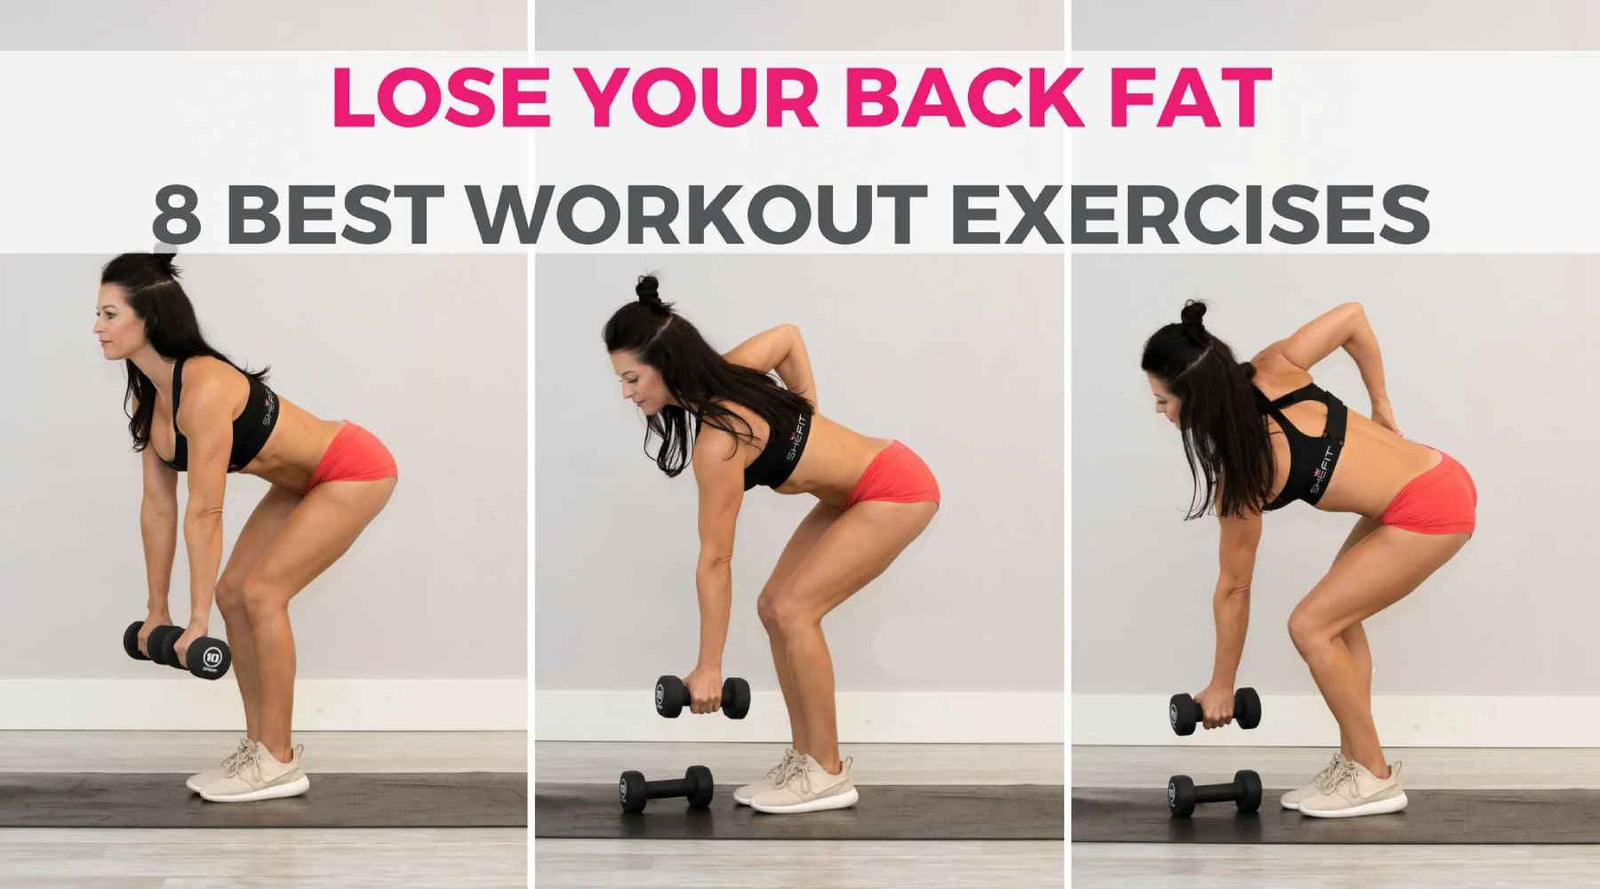 THE BEST 8 EXERCISES FOR A COMPLETE BACK WORKOUT. Get a complete